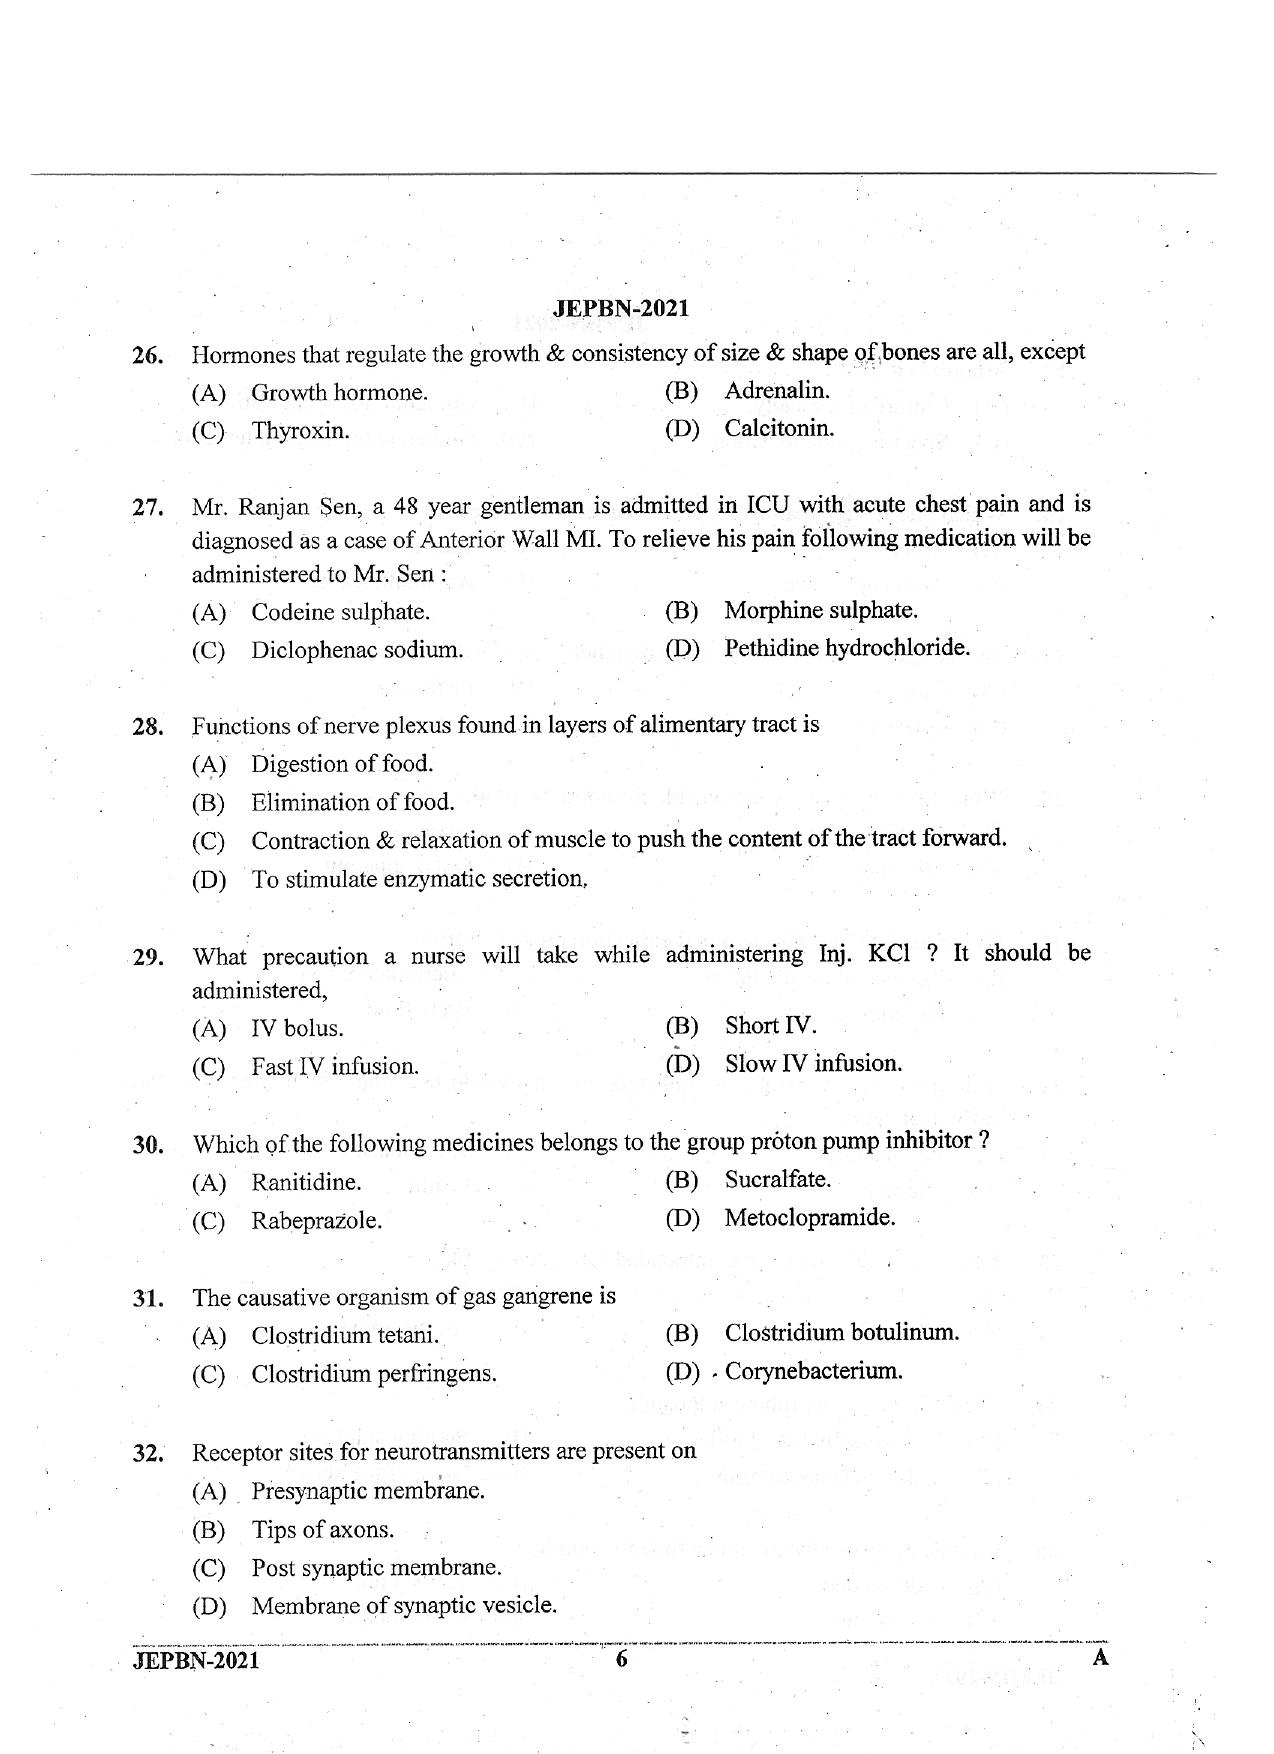 WBJEE JEPBN 2021 Question Paper - Page 6